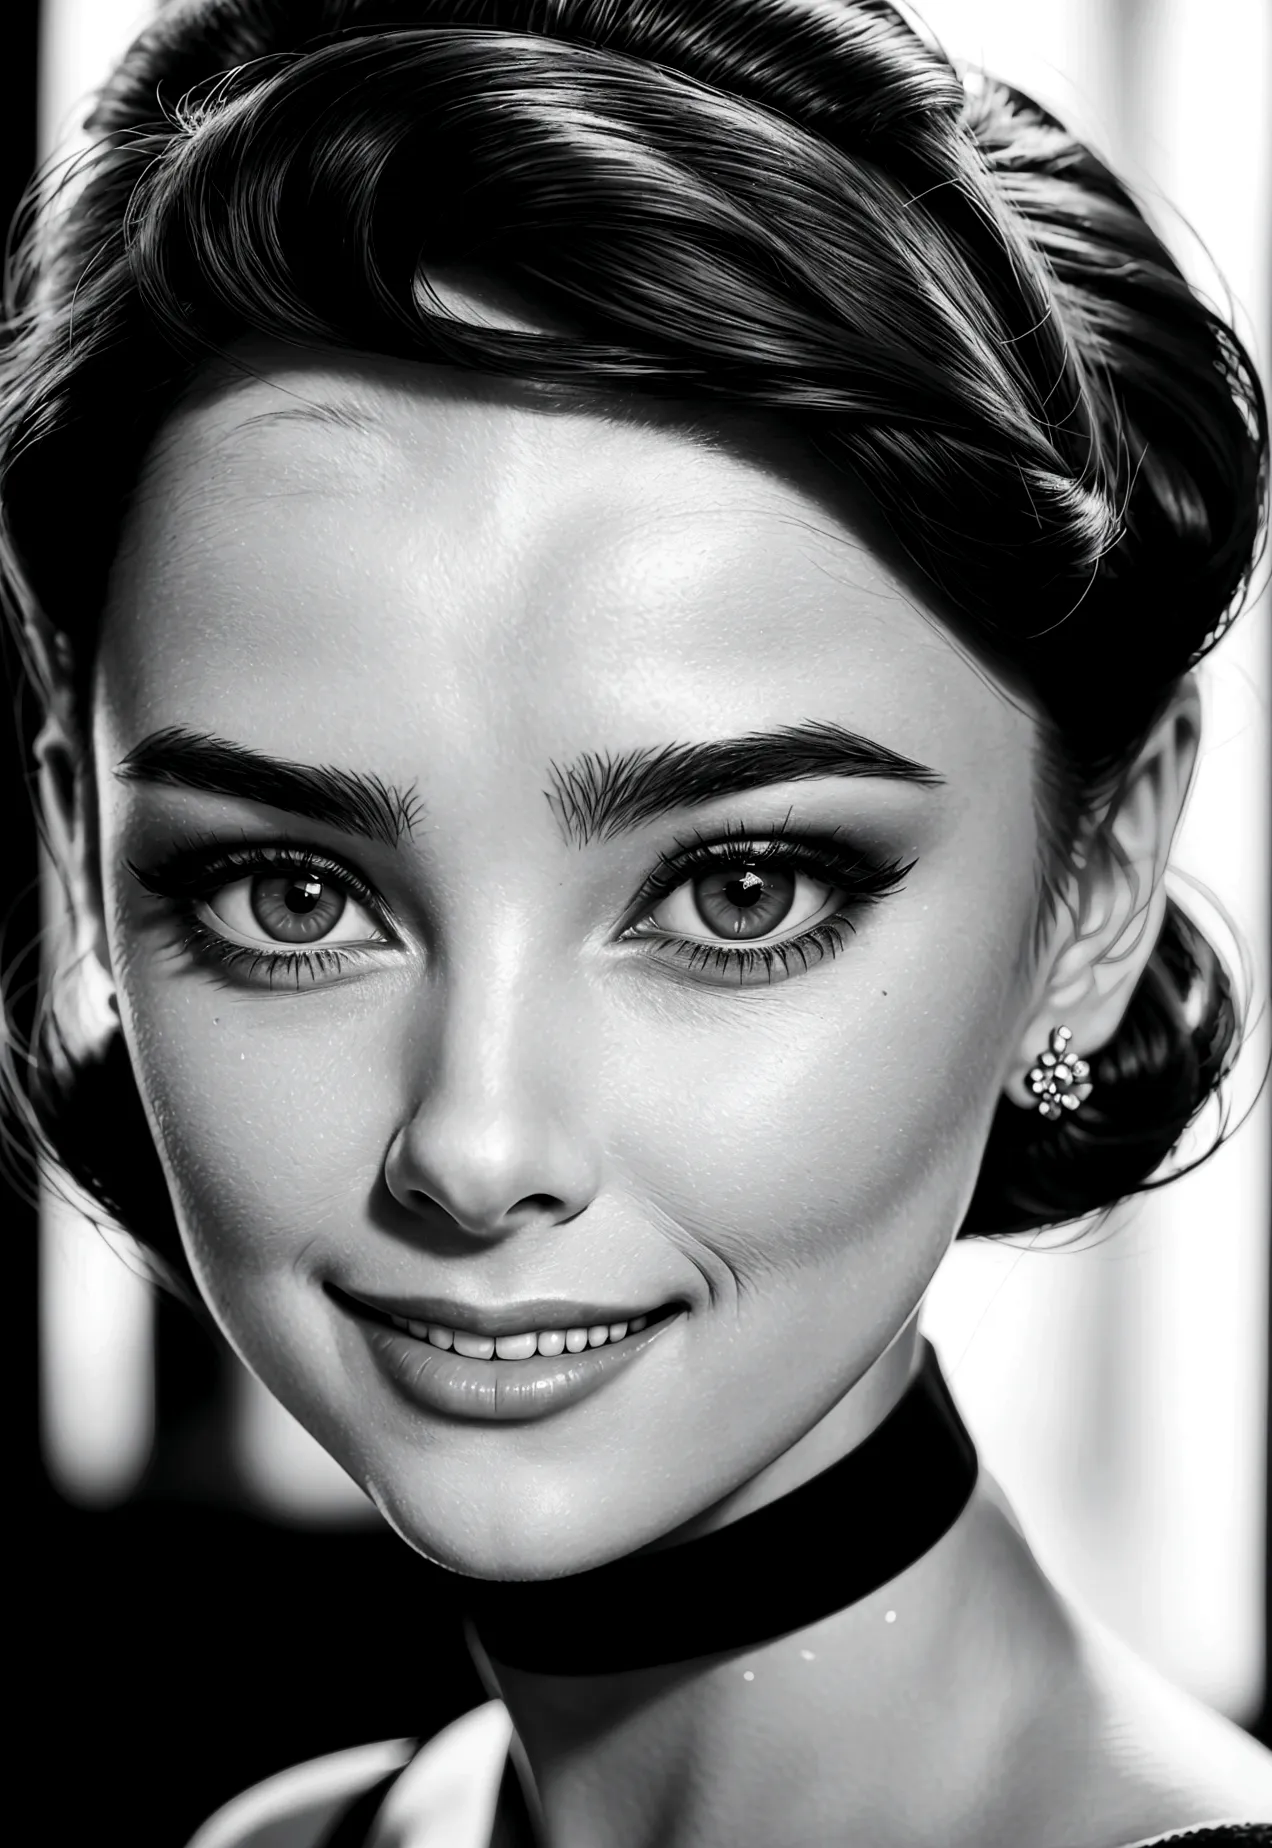 Photograph of a 20-year-old woman resembling Audrey Hepburn: short dark hair, large expressive eyes and an elegant smile. Perfec...